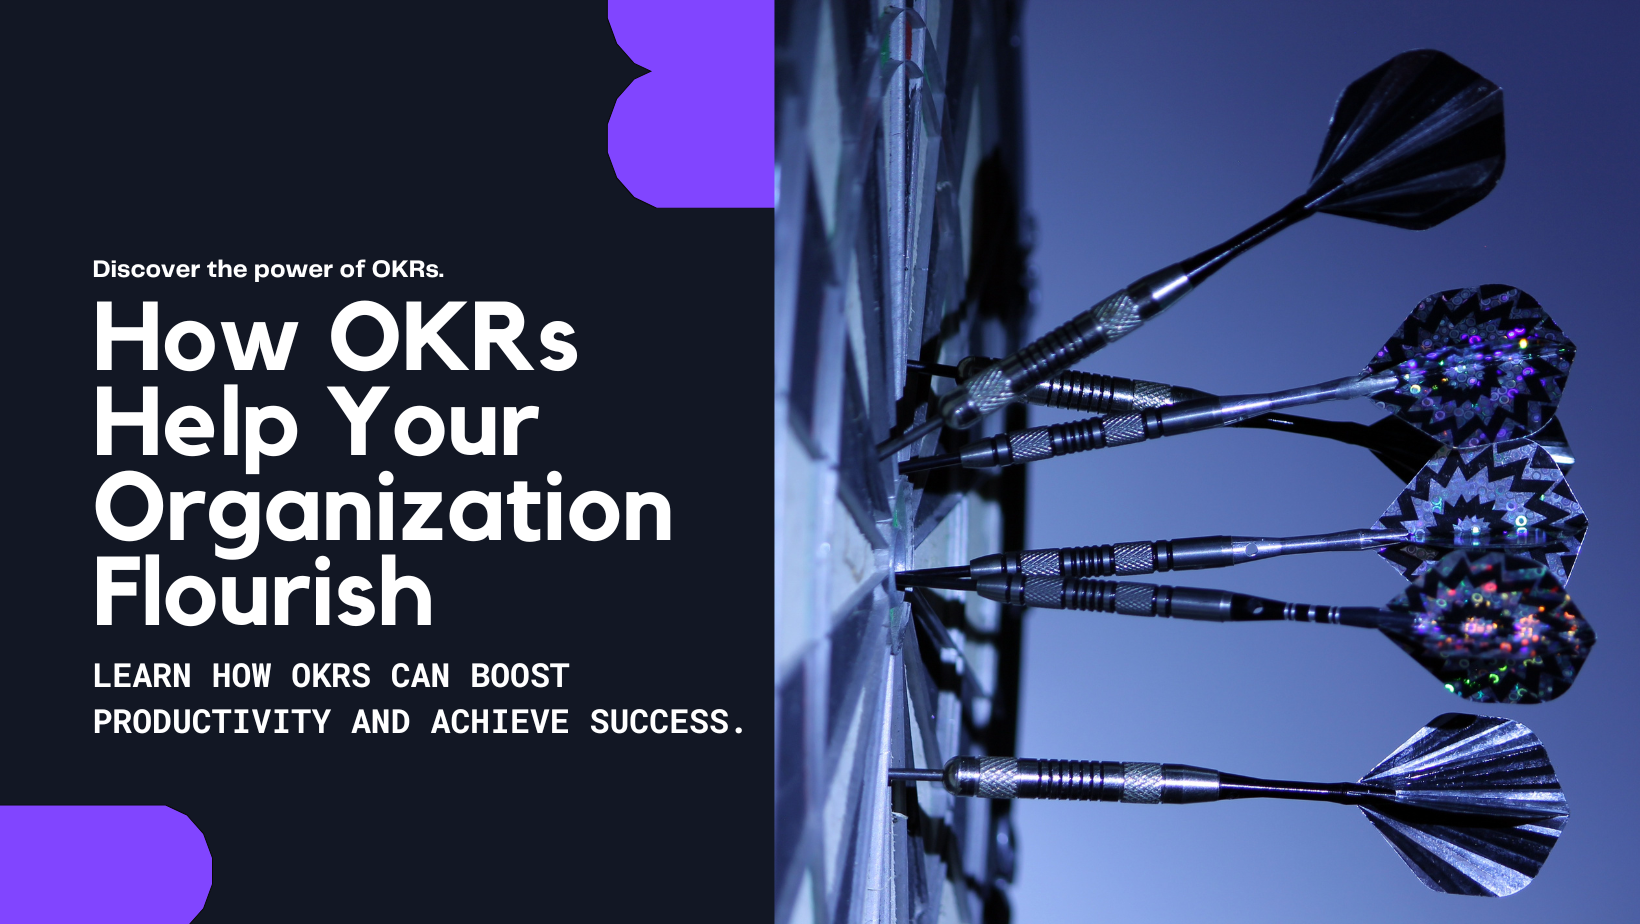 Unlock the potential of OKRs to drive alignment, transparency, agility, and growth in your organization. Learn how implementing OKRs effectively can enhance performance and achieve your goals in a competitive business landscape.